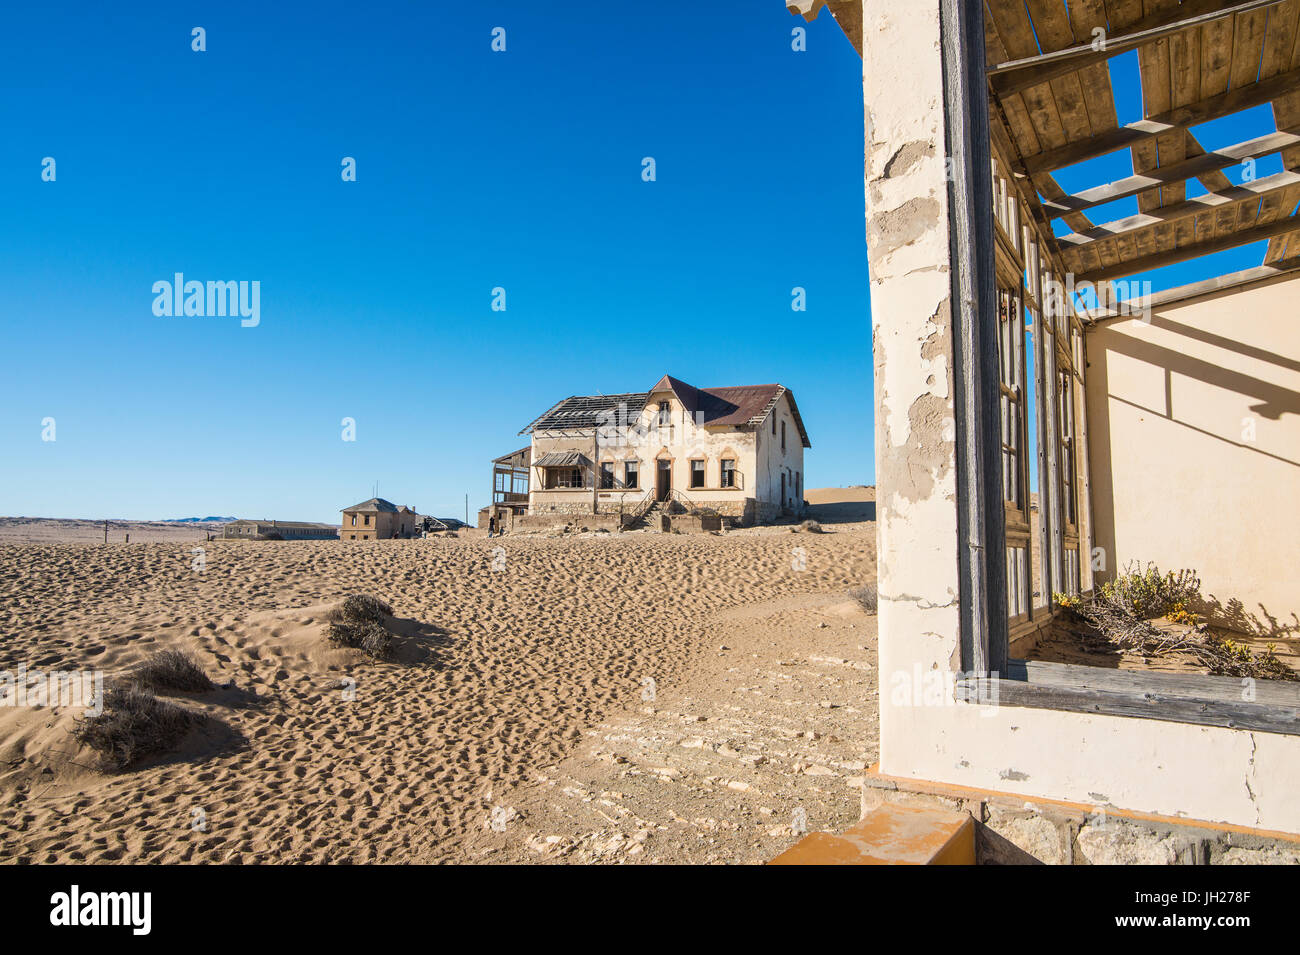 Colonial house, old diamond ghost town, Kolmanskop (Coleman's Hill), near Luderitz, Namibia, Africa Stock Photo